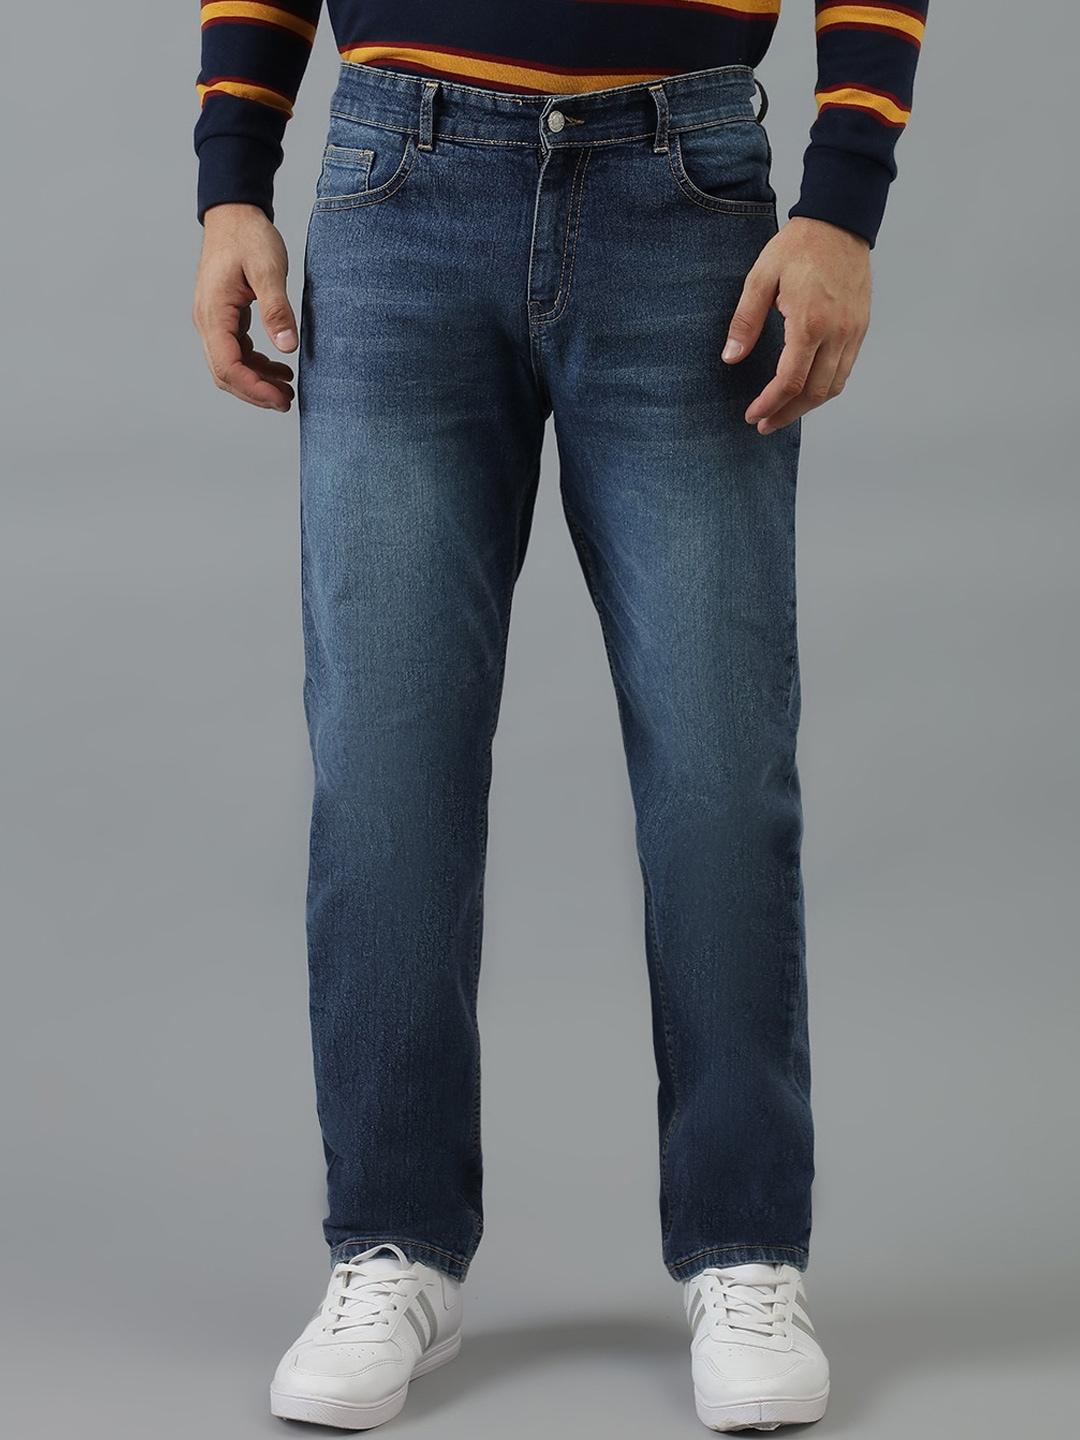 kotty-men-blue-jean-slim-fit-clean-look-low-rise-light-fade-stretchable-jeans